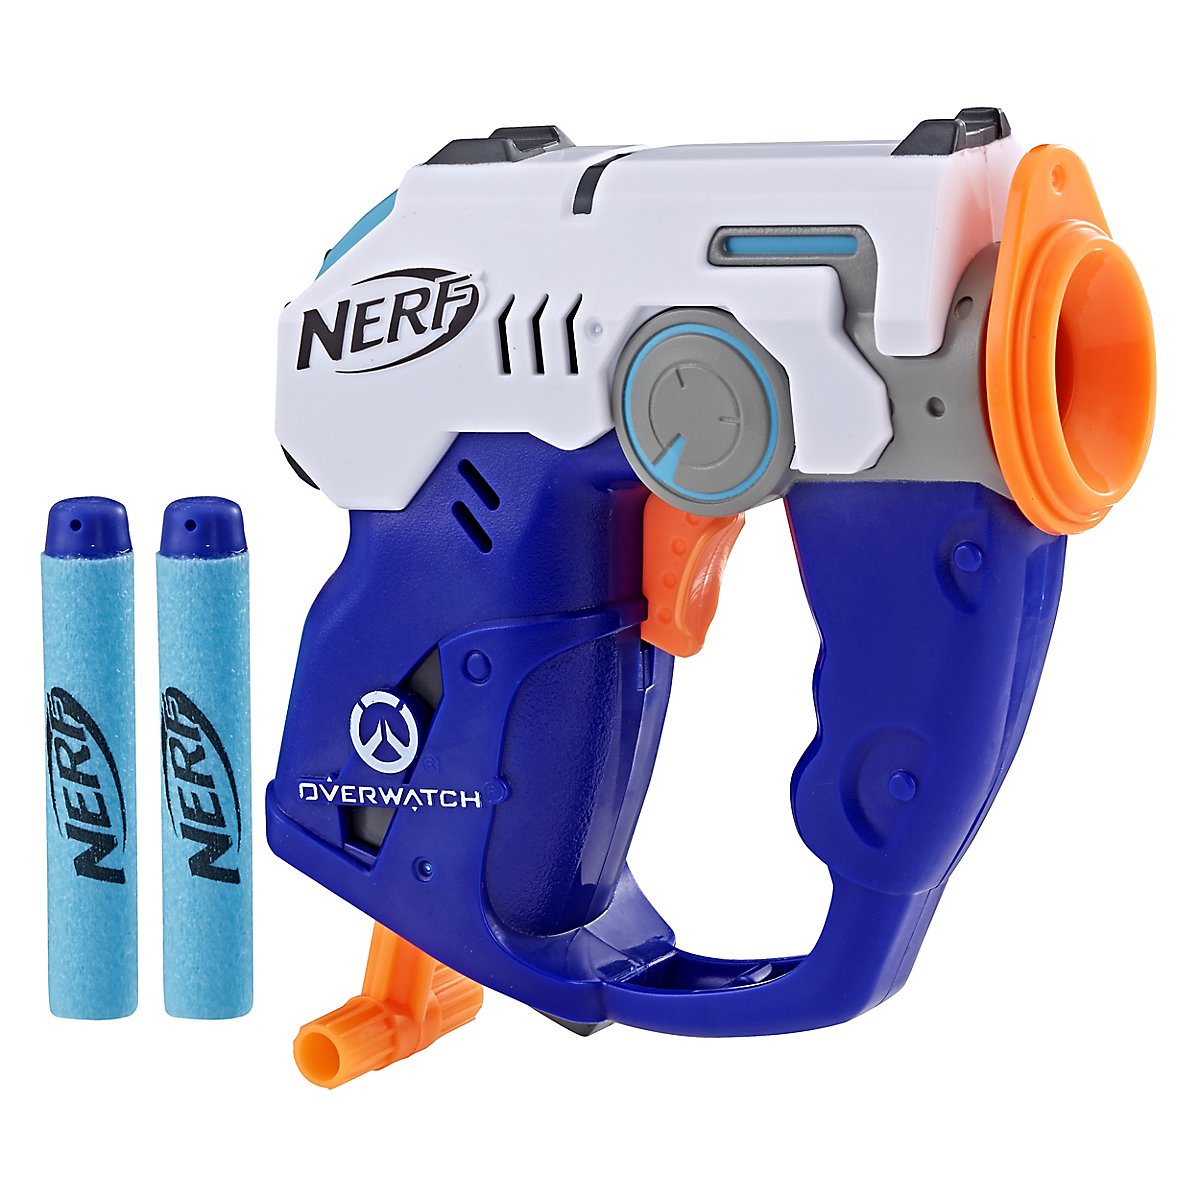 Nerf Microshots Overwatch Tracer